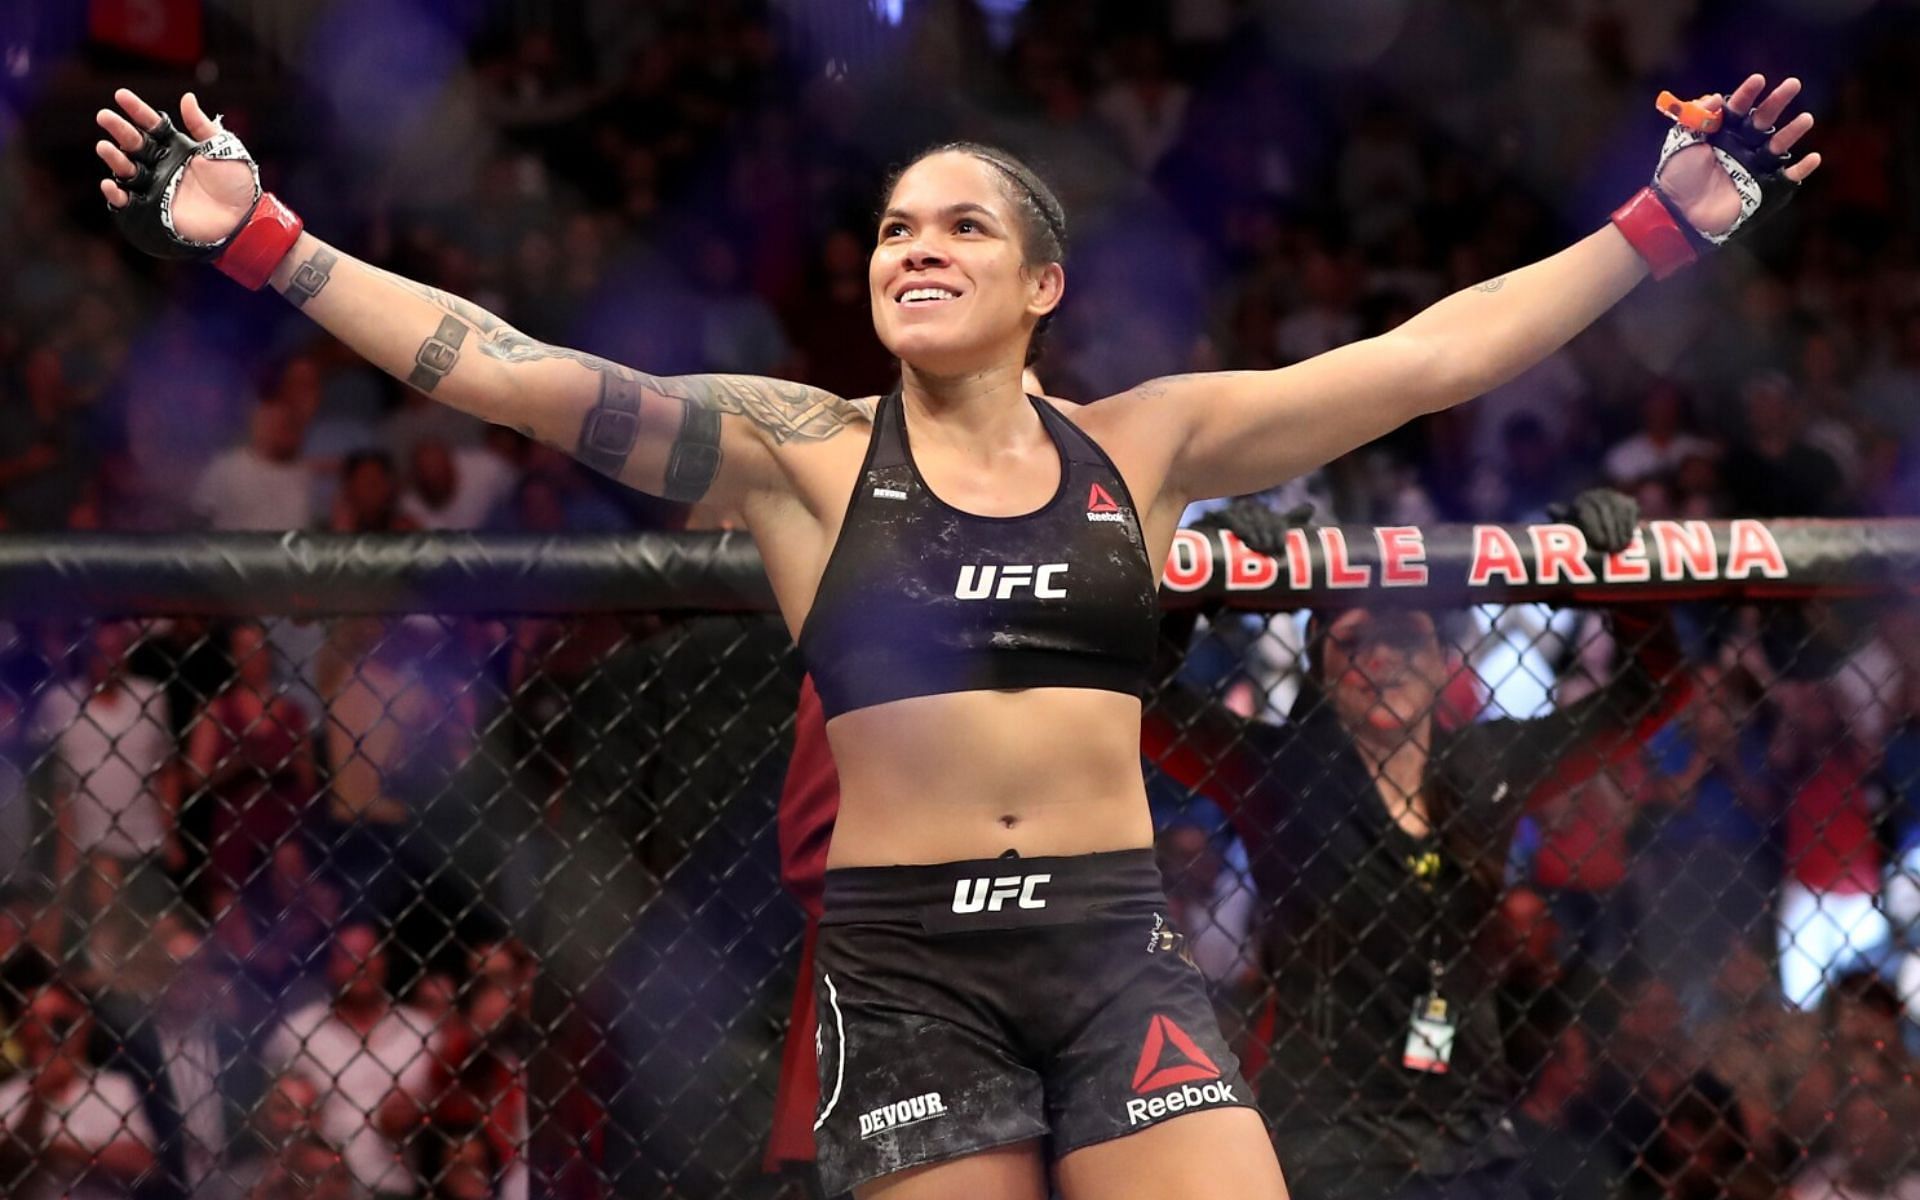 After UFC 269, will it be time for Amanda Nunes to step away from the UFC?